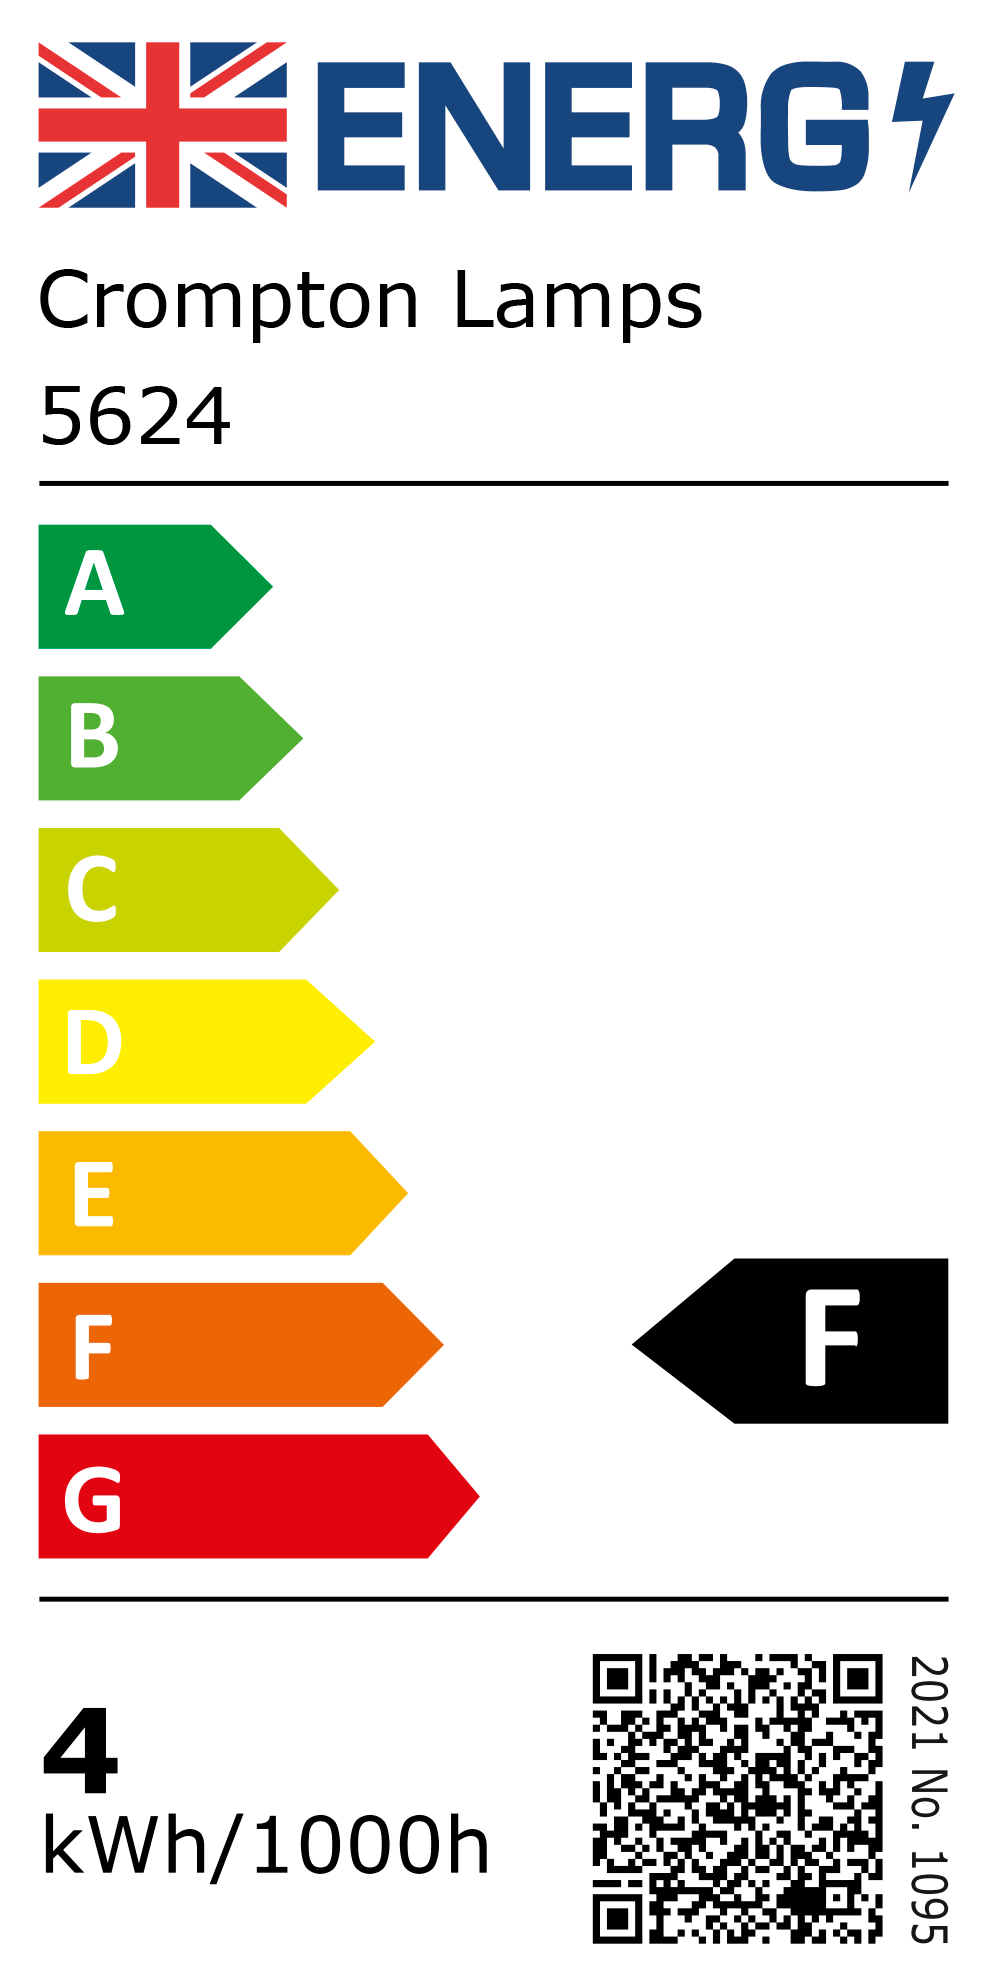 New 2021 Energy Rating Label: Stock Code 5624